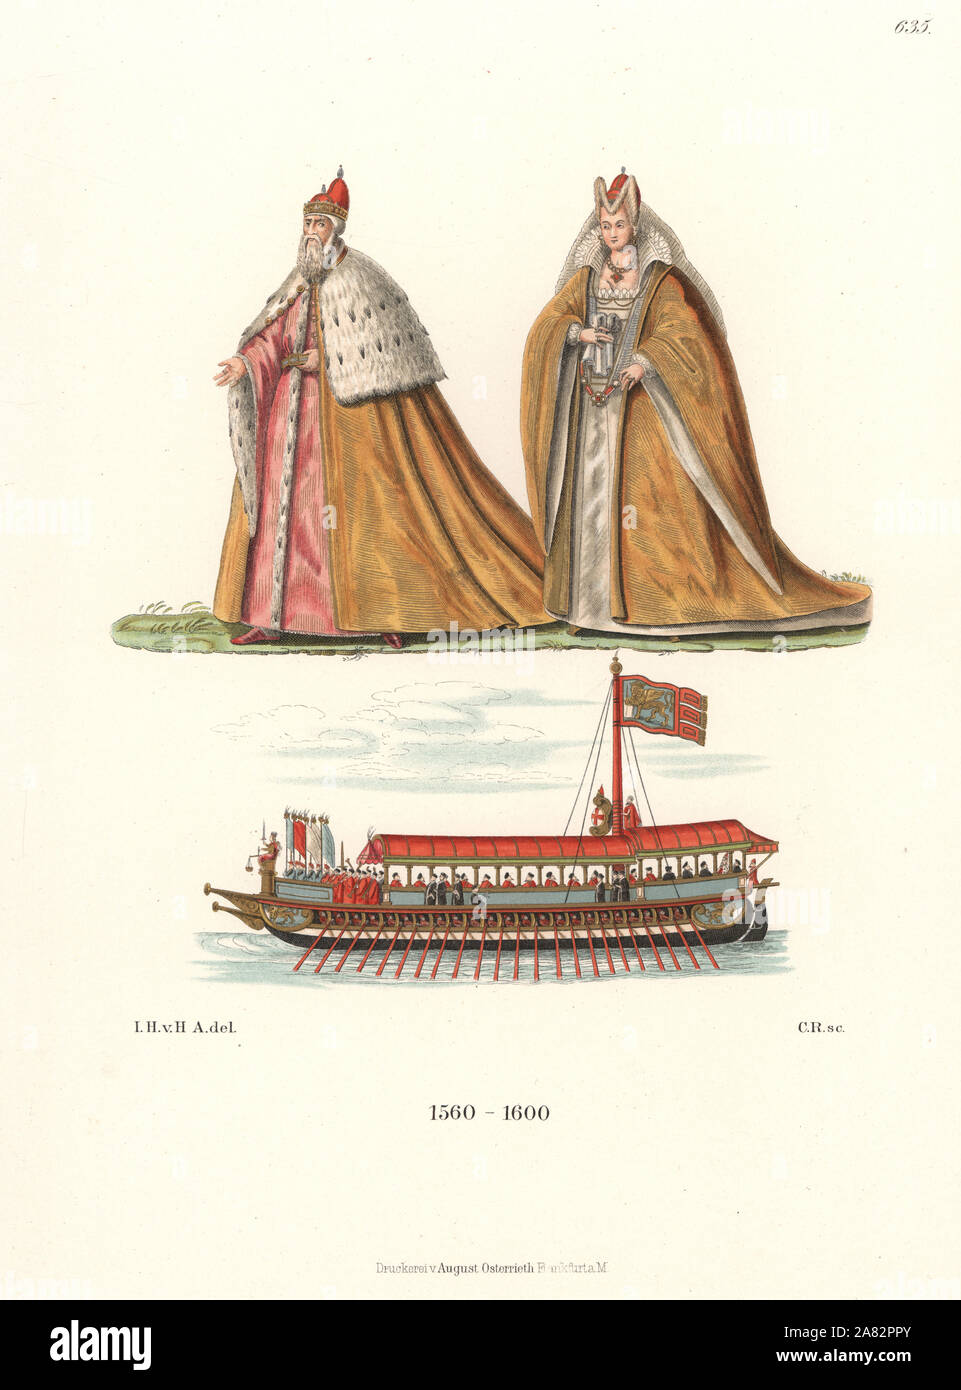 Doge and Dogaressa of Venice, and the state barge or bucentaur, 16th century. Chromolithograph from Hefner-Alteneck's Costumes, Artworks and Appliances from the Middle Ages to the 17th Century, Frankfurt, 1889. Illustration by Dr. Jakob Heinrich von Hefner-Alteneck, lithographed by C. Regnier. Dr. Hefner-Alteneck (1811-1903) was a German museum curator, archaeologist, art historian, illustrator and etcher. Stock Photo